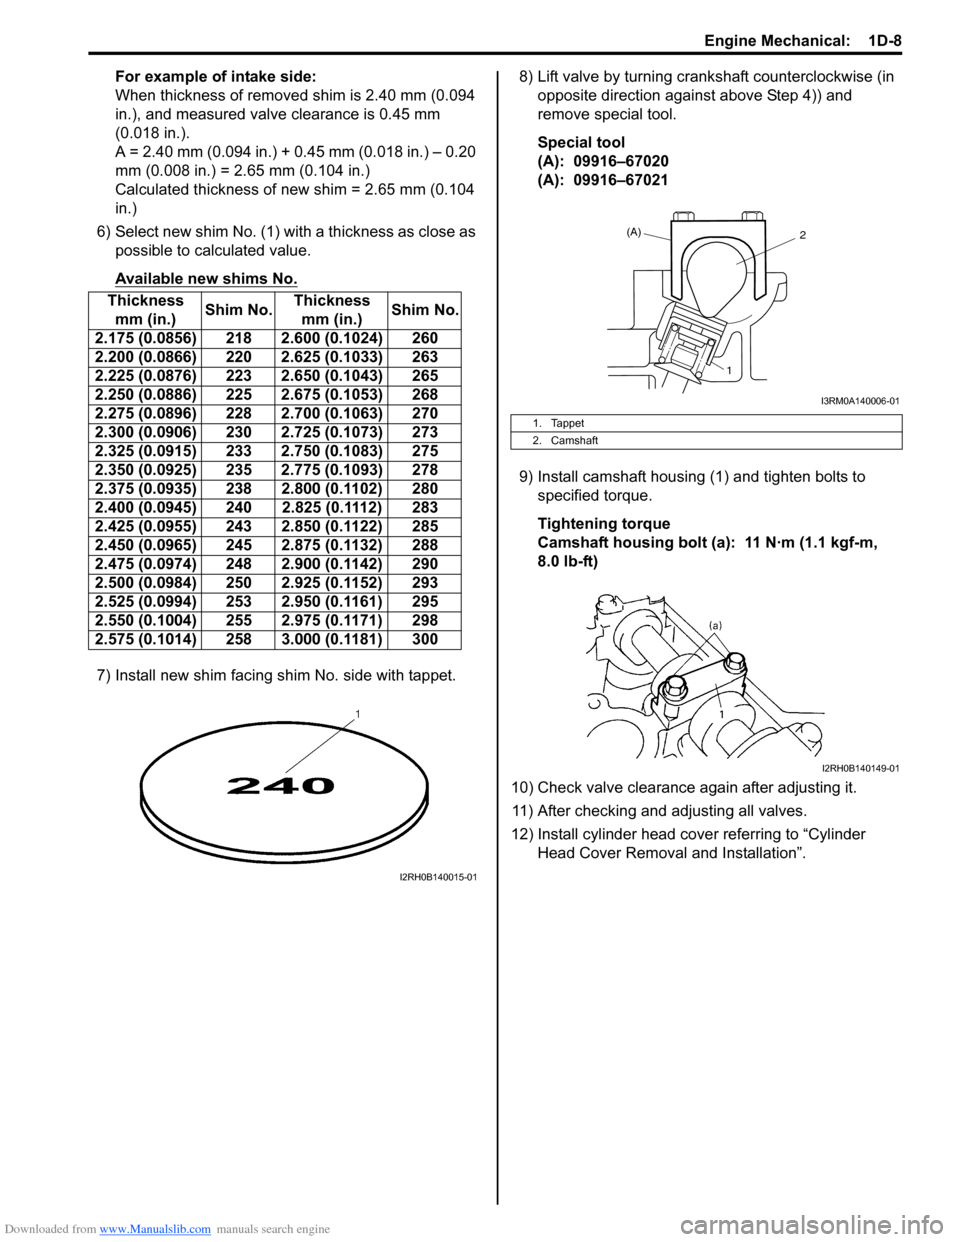 SUZUKI SWIFT 2006 2.G Service Workshop Manual Downloaded from www.Manualslib.com manuals search engine Engine Mechanical:  1D-8
For example of intake side:
When thickness of removed shim is 2.40 mm (0.094 
in.), and measured valve clearance is 0.